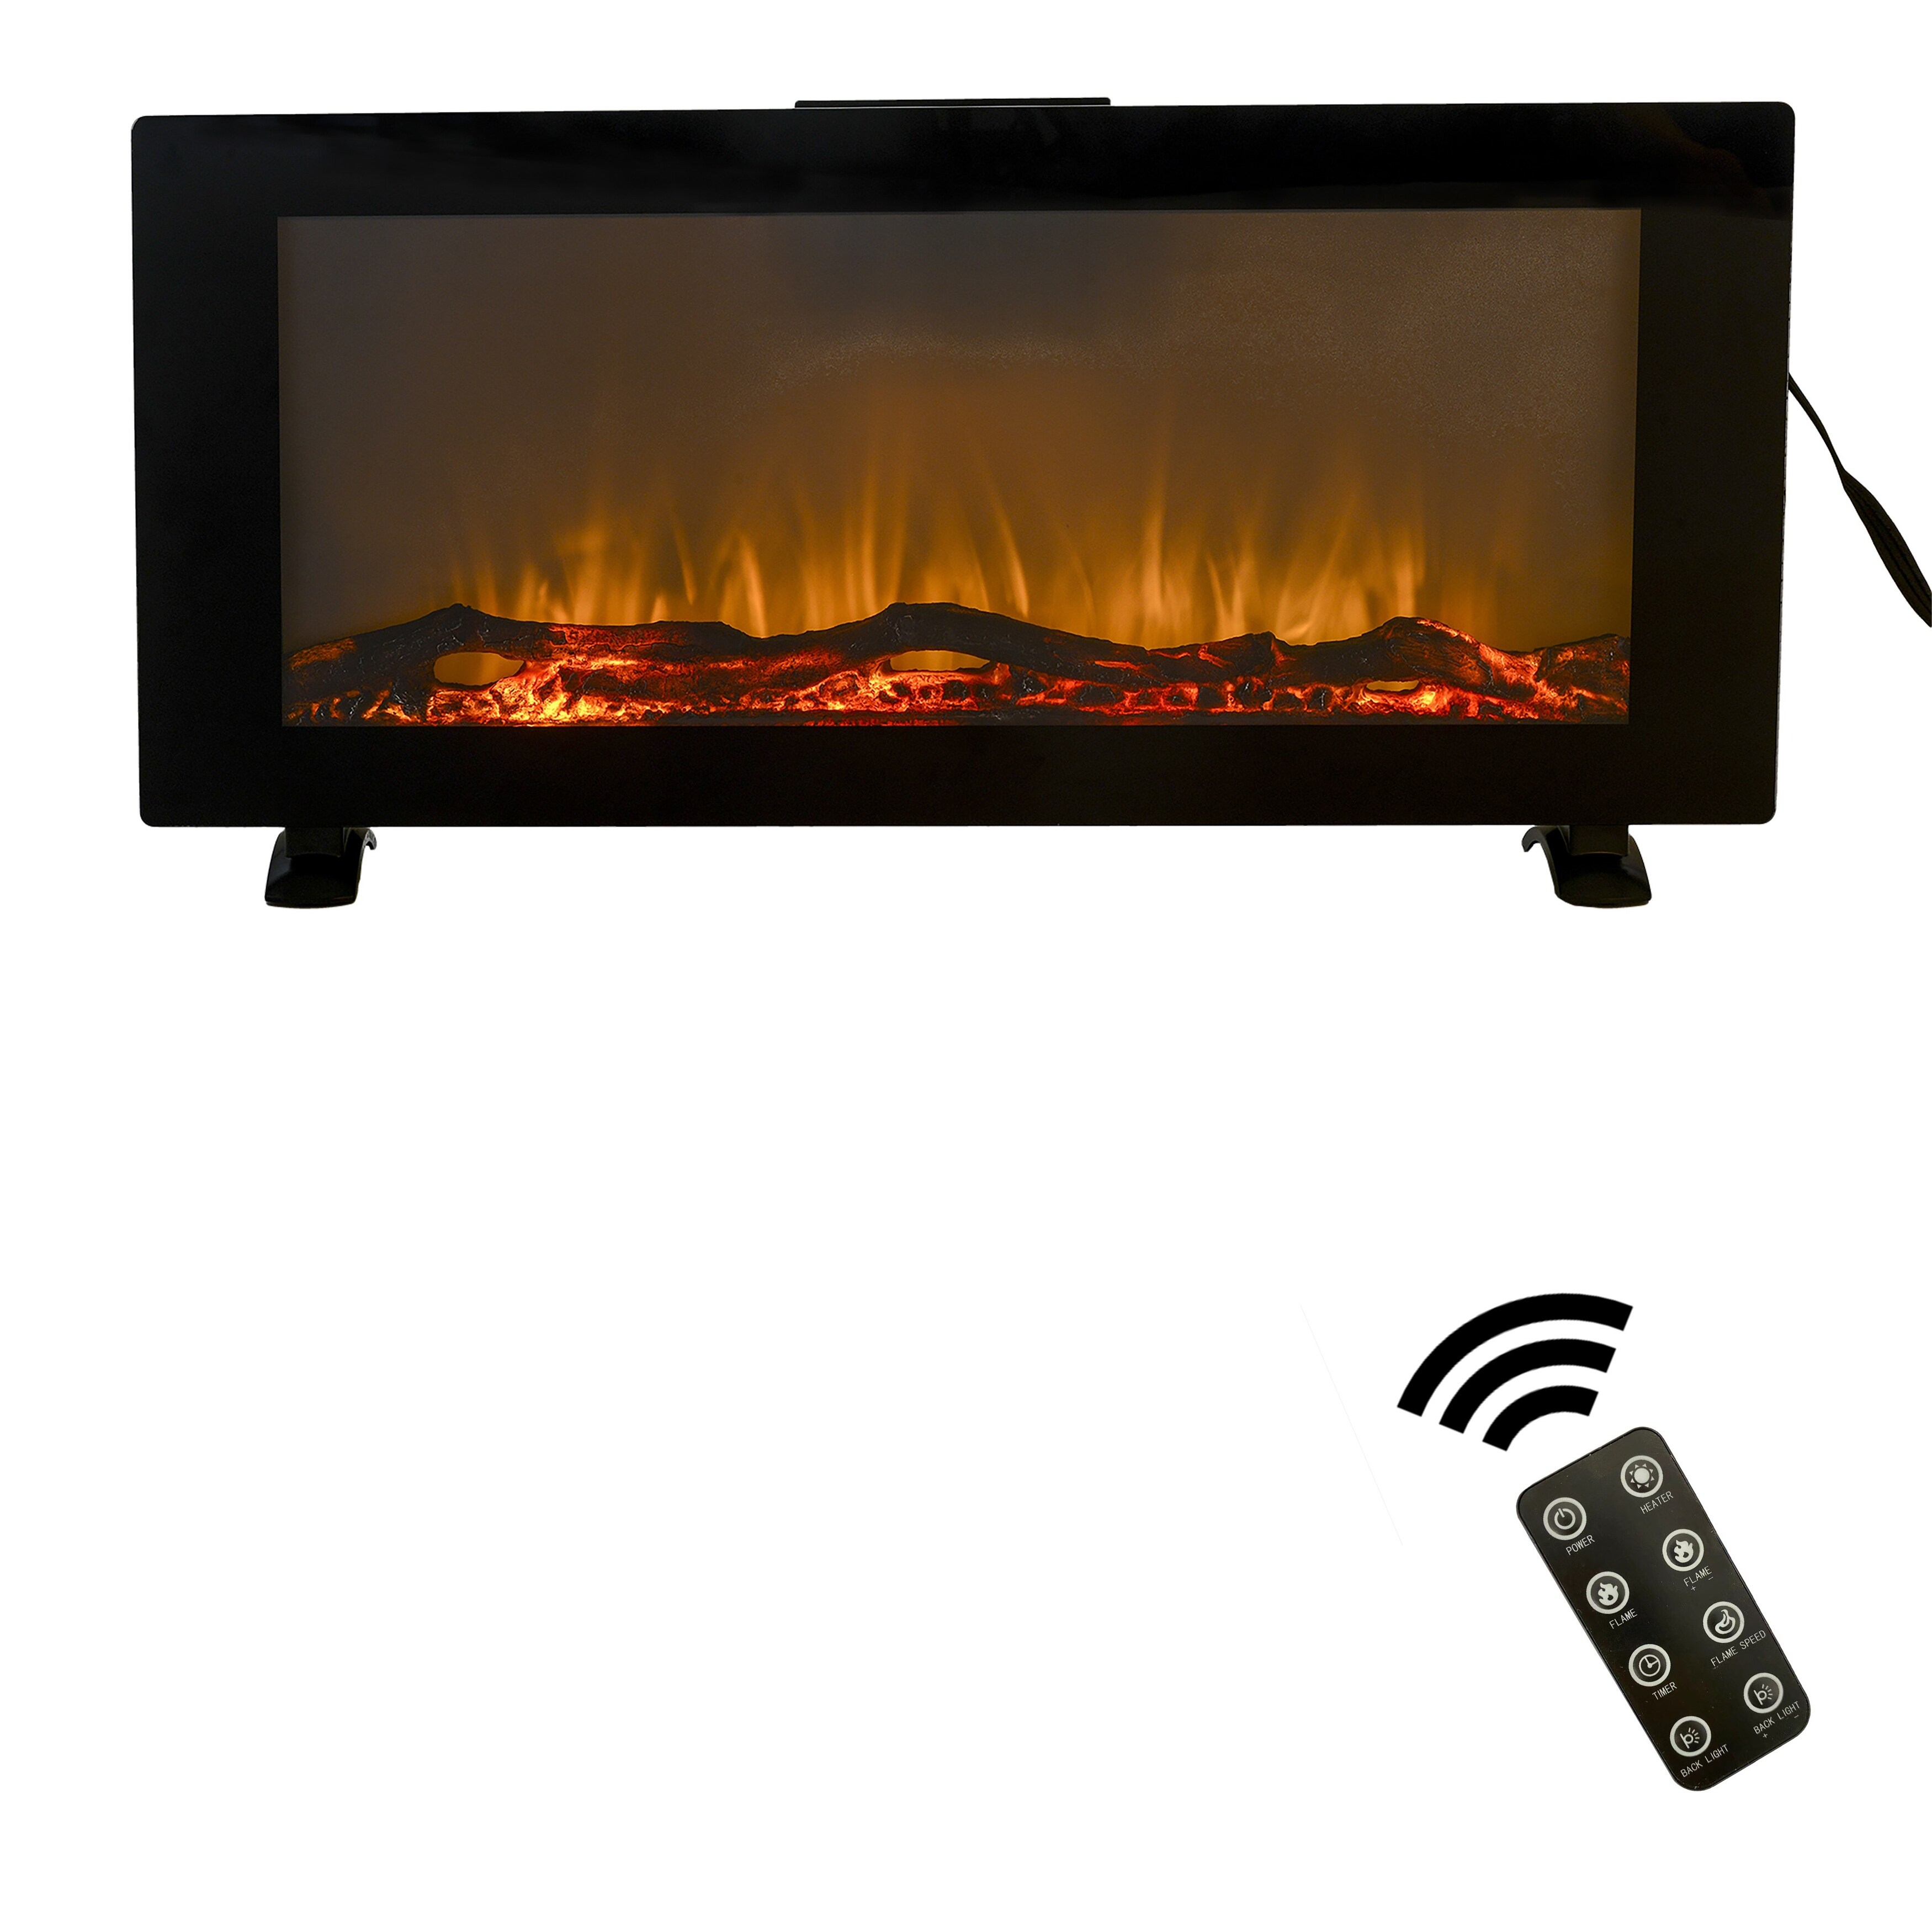 cadeninc 42 in. Wall-Mount Metal Smart Electric Fireplace in Black with 10 Adjustable Color and Remote Control